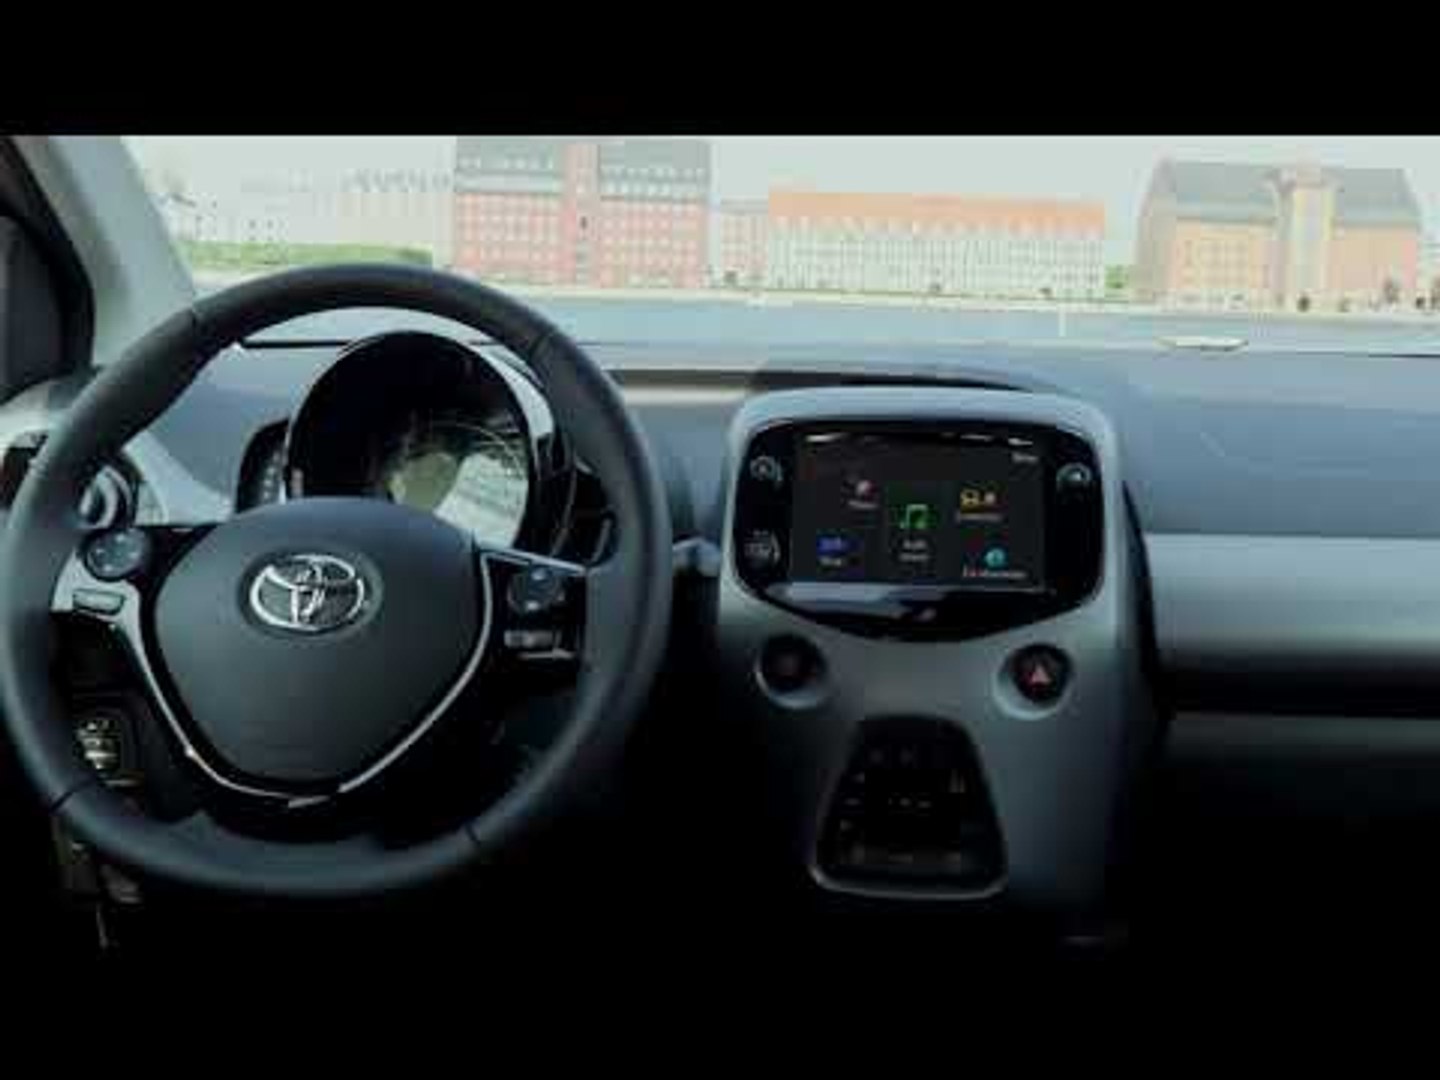 Interior design and technology – Toyota Aygo X - Just Auto